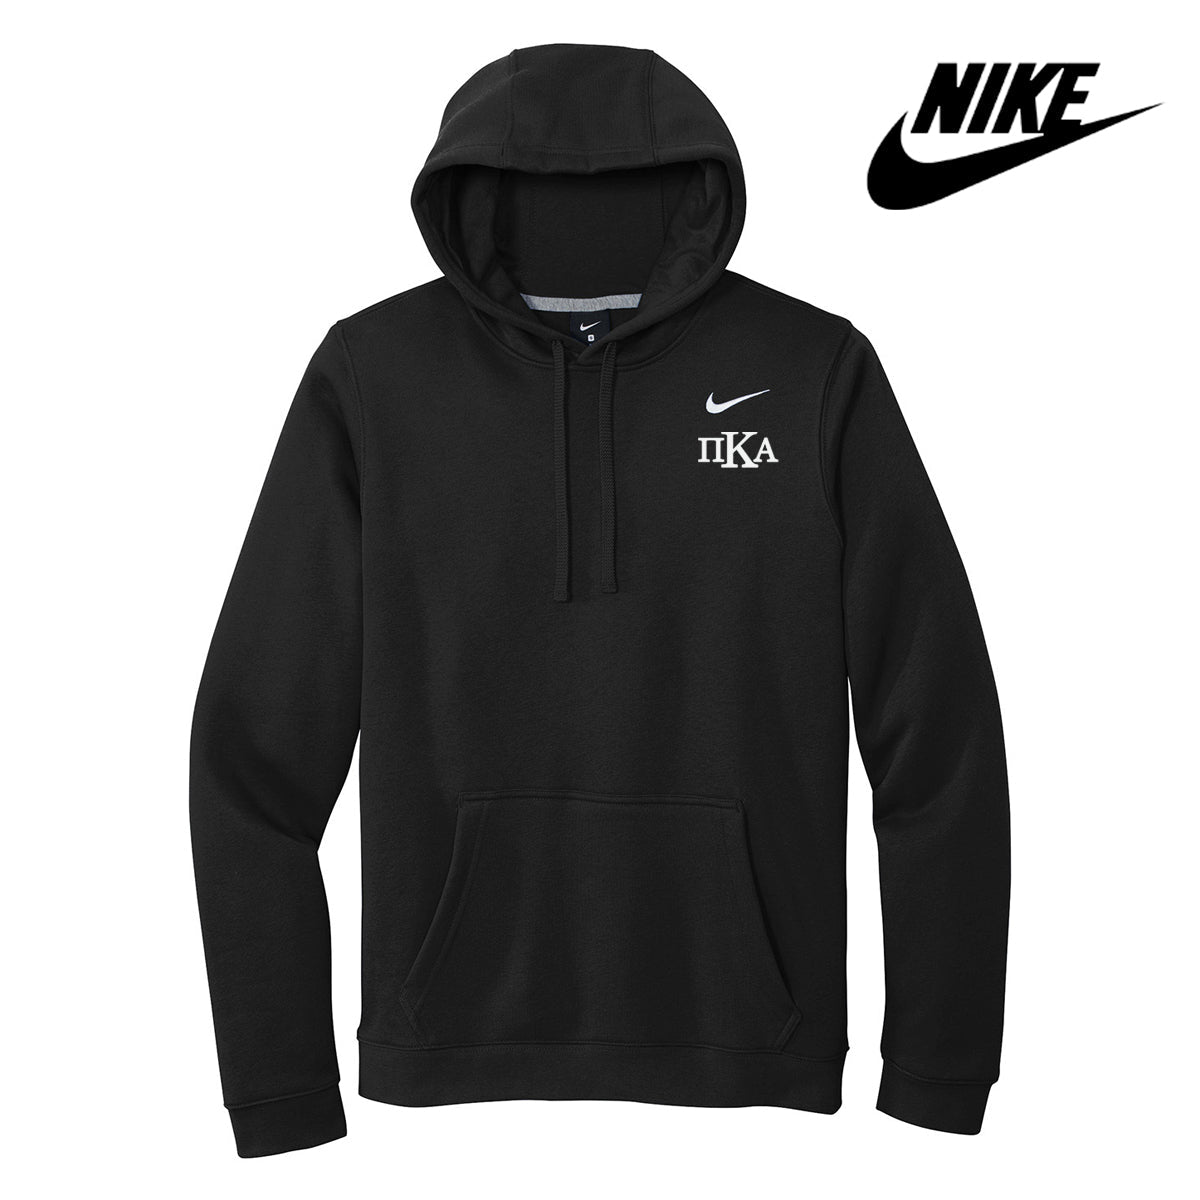 caballo de Troya mal humor Inflar Pike Nike Black Embroidered Hoodie – Campus Classics